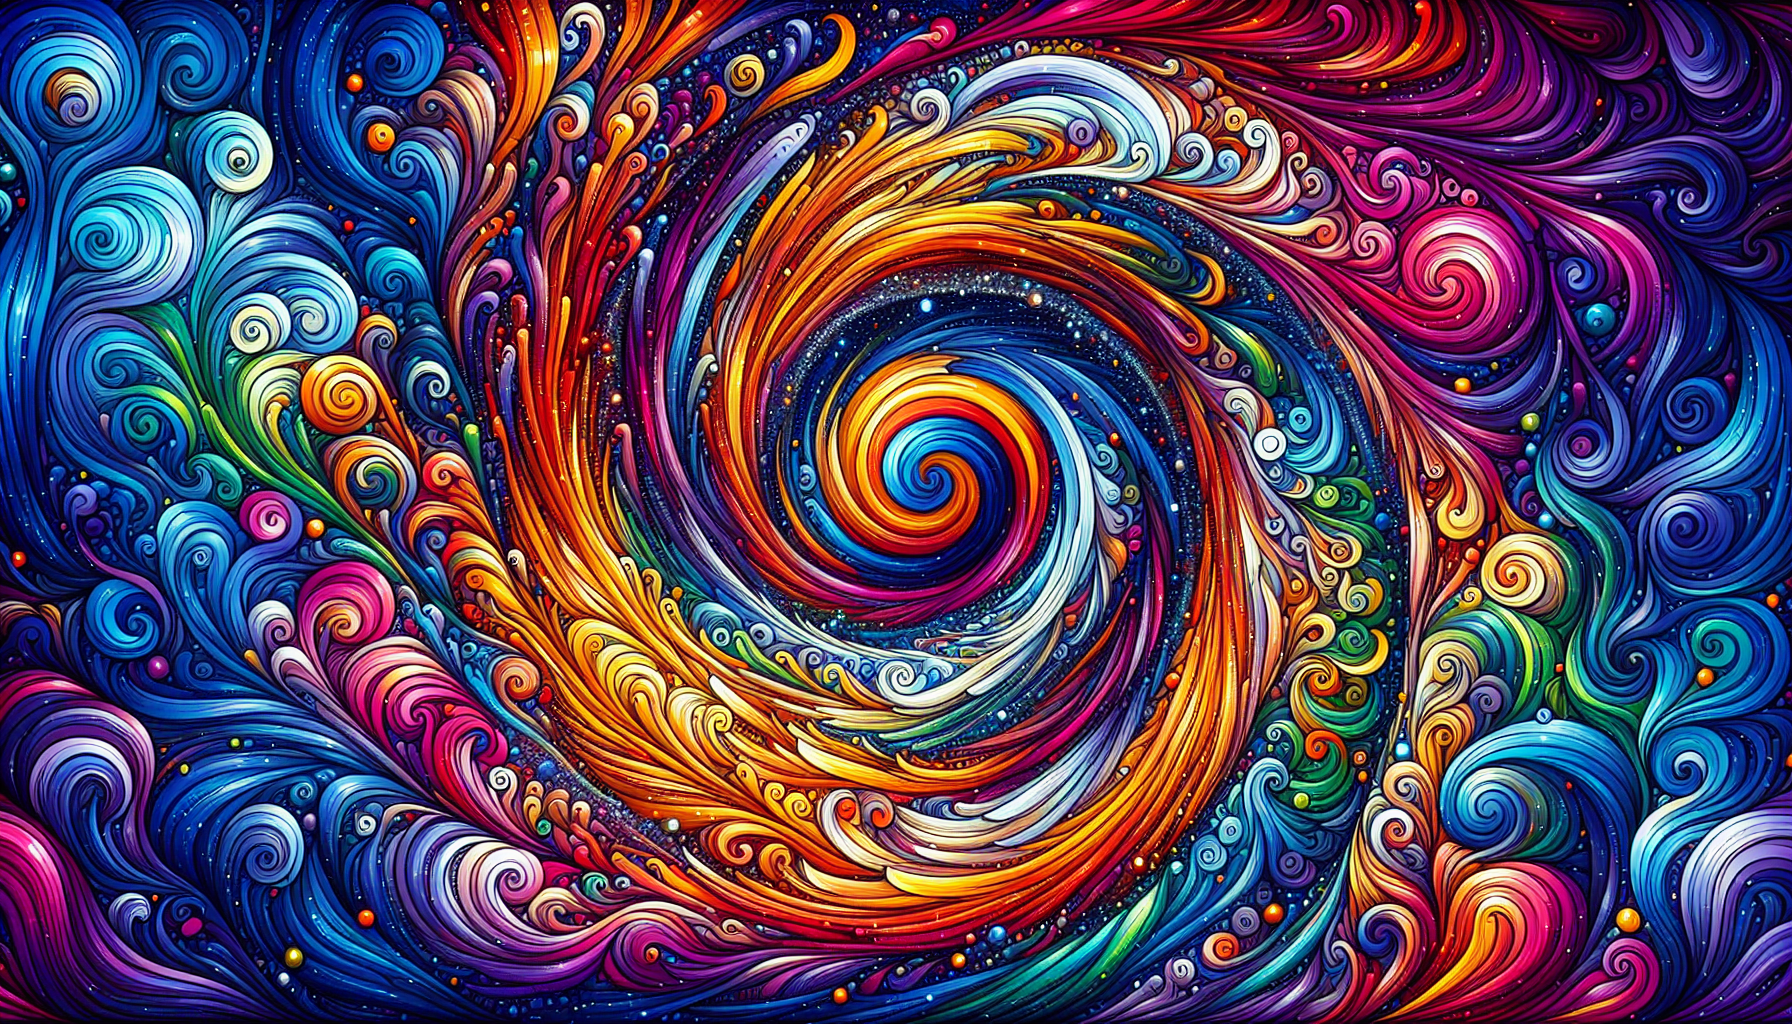 A colorful illustration of a swirling vortex representing the concept of luck and its mysterious nature.